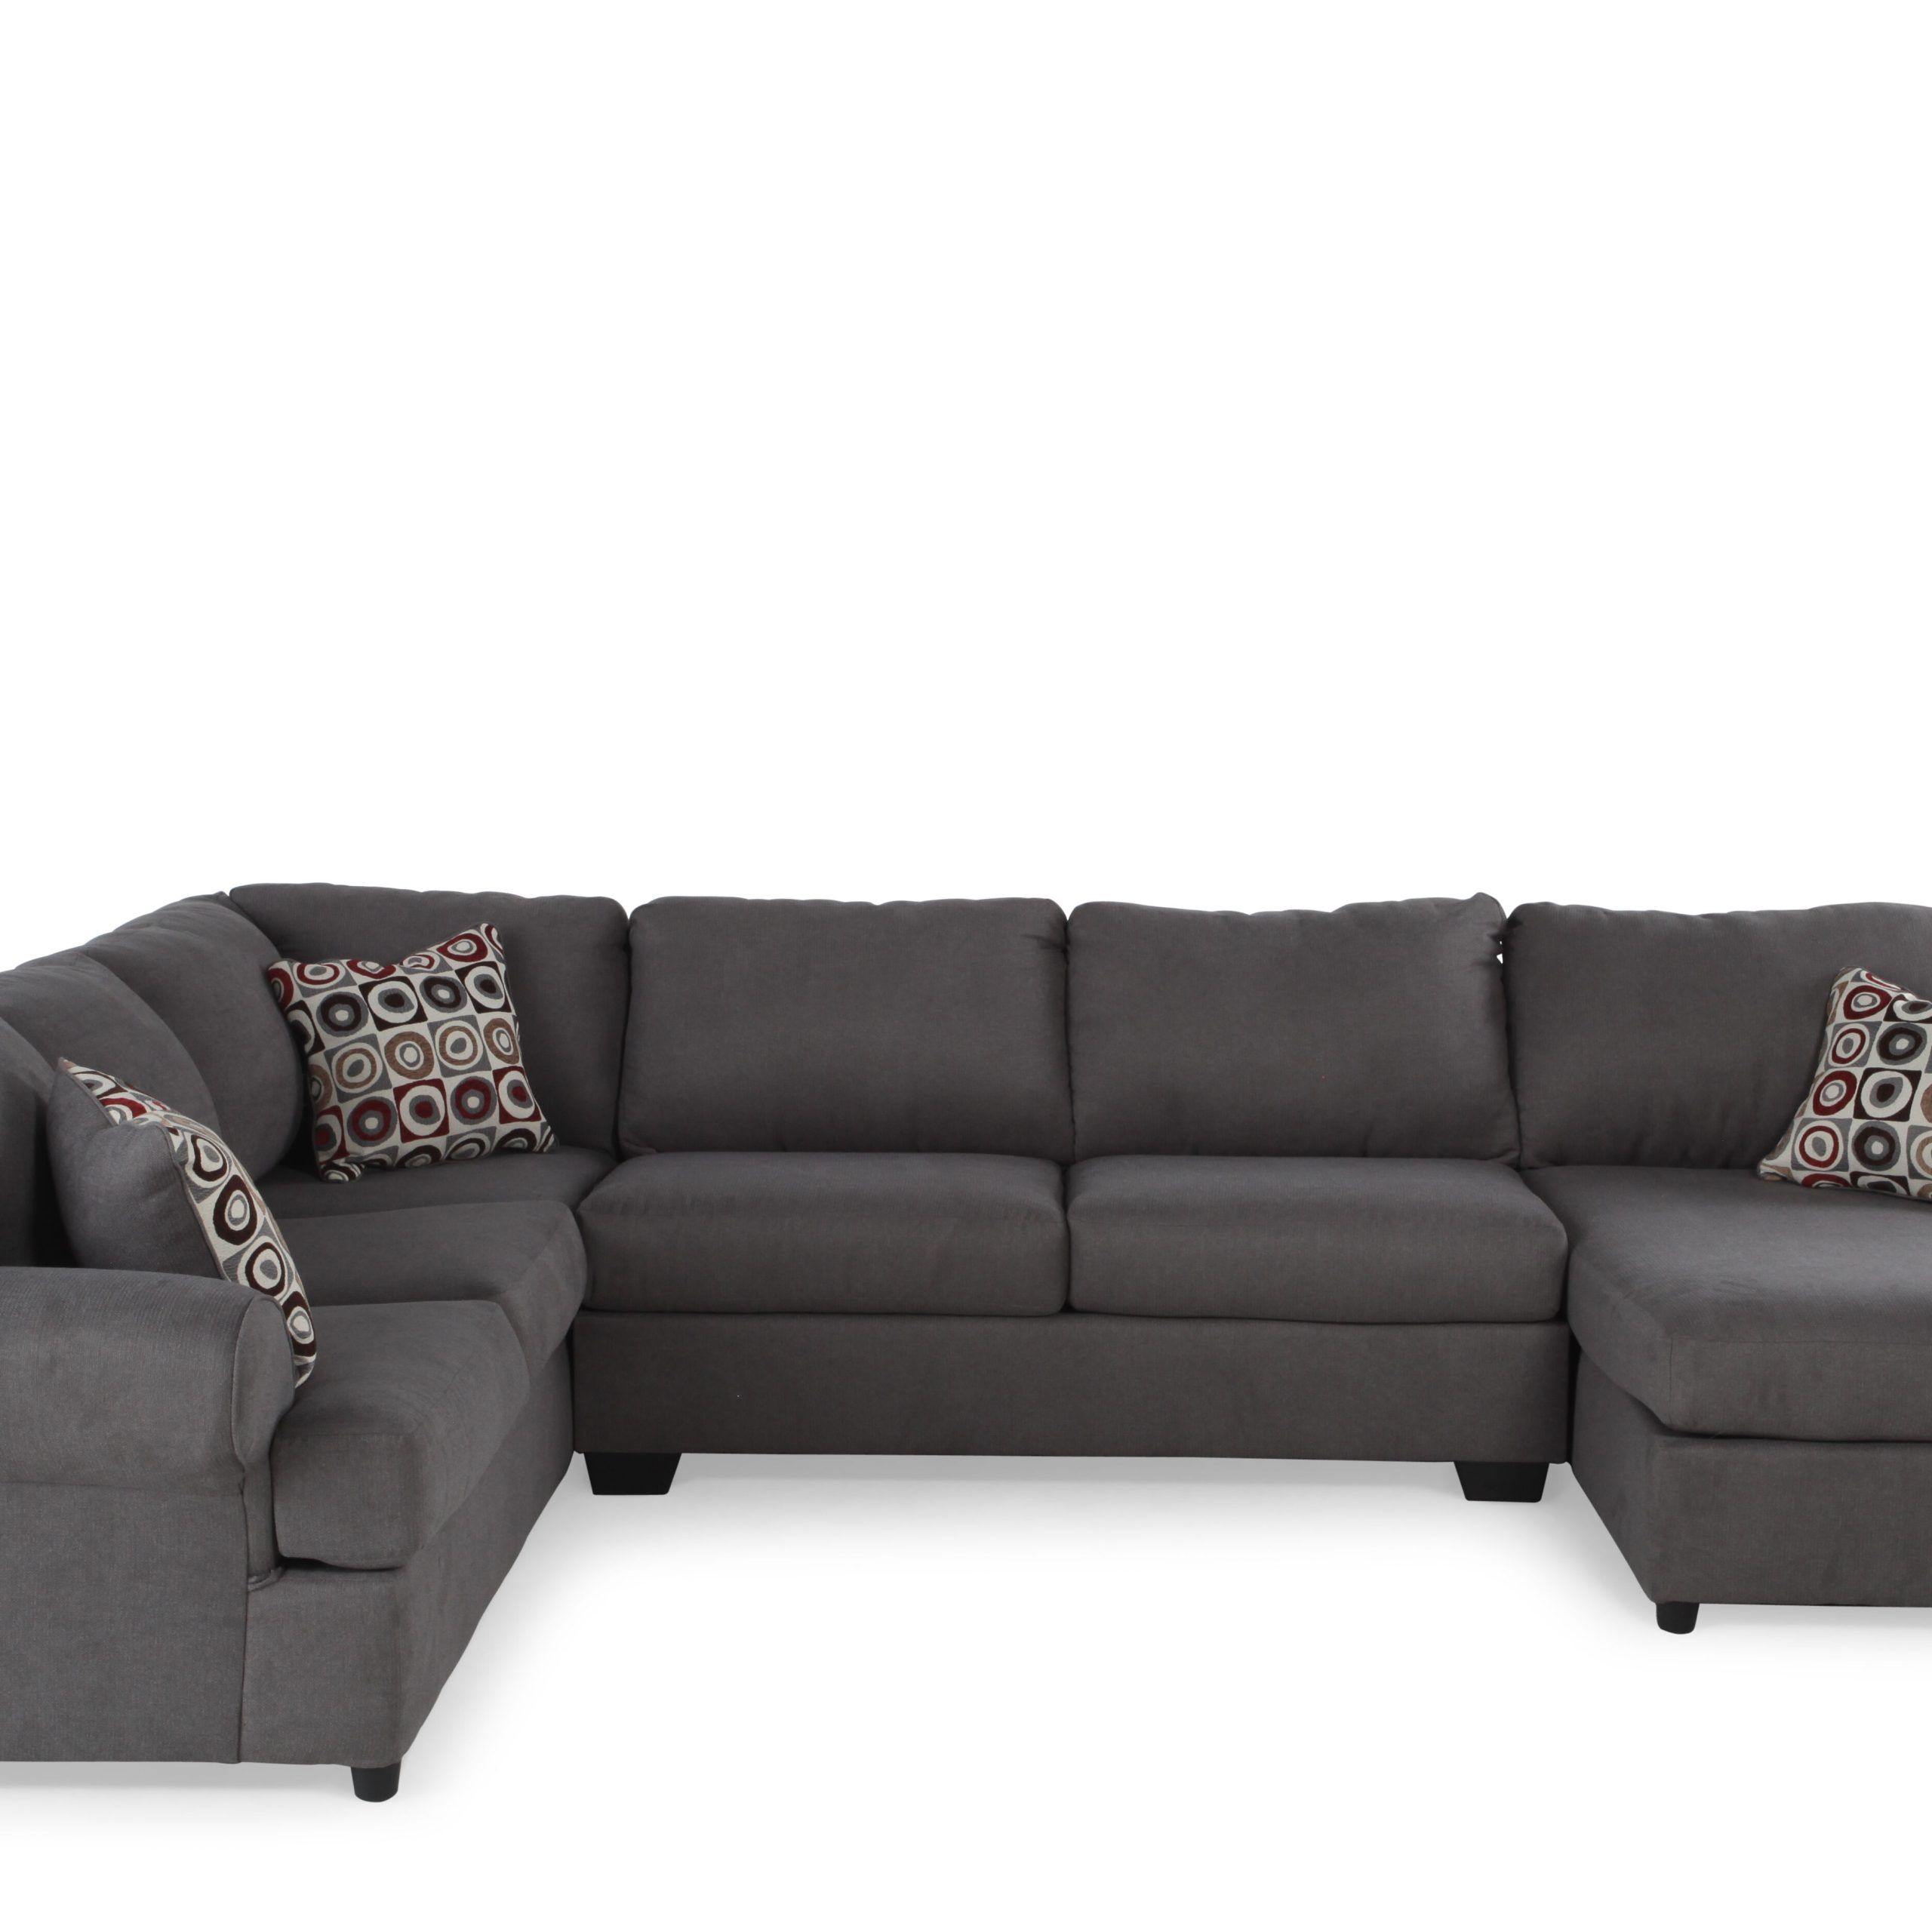 Three Piece Microfiber 93" Sectional In Dark Gray | Mathis Brothers Within Microfiber Sectional Corner Sofas (Gallery 19 of 20)